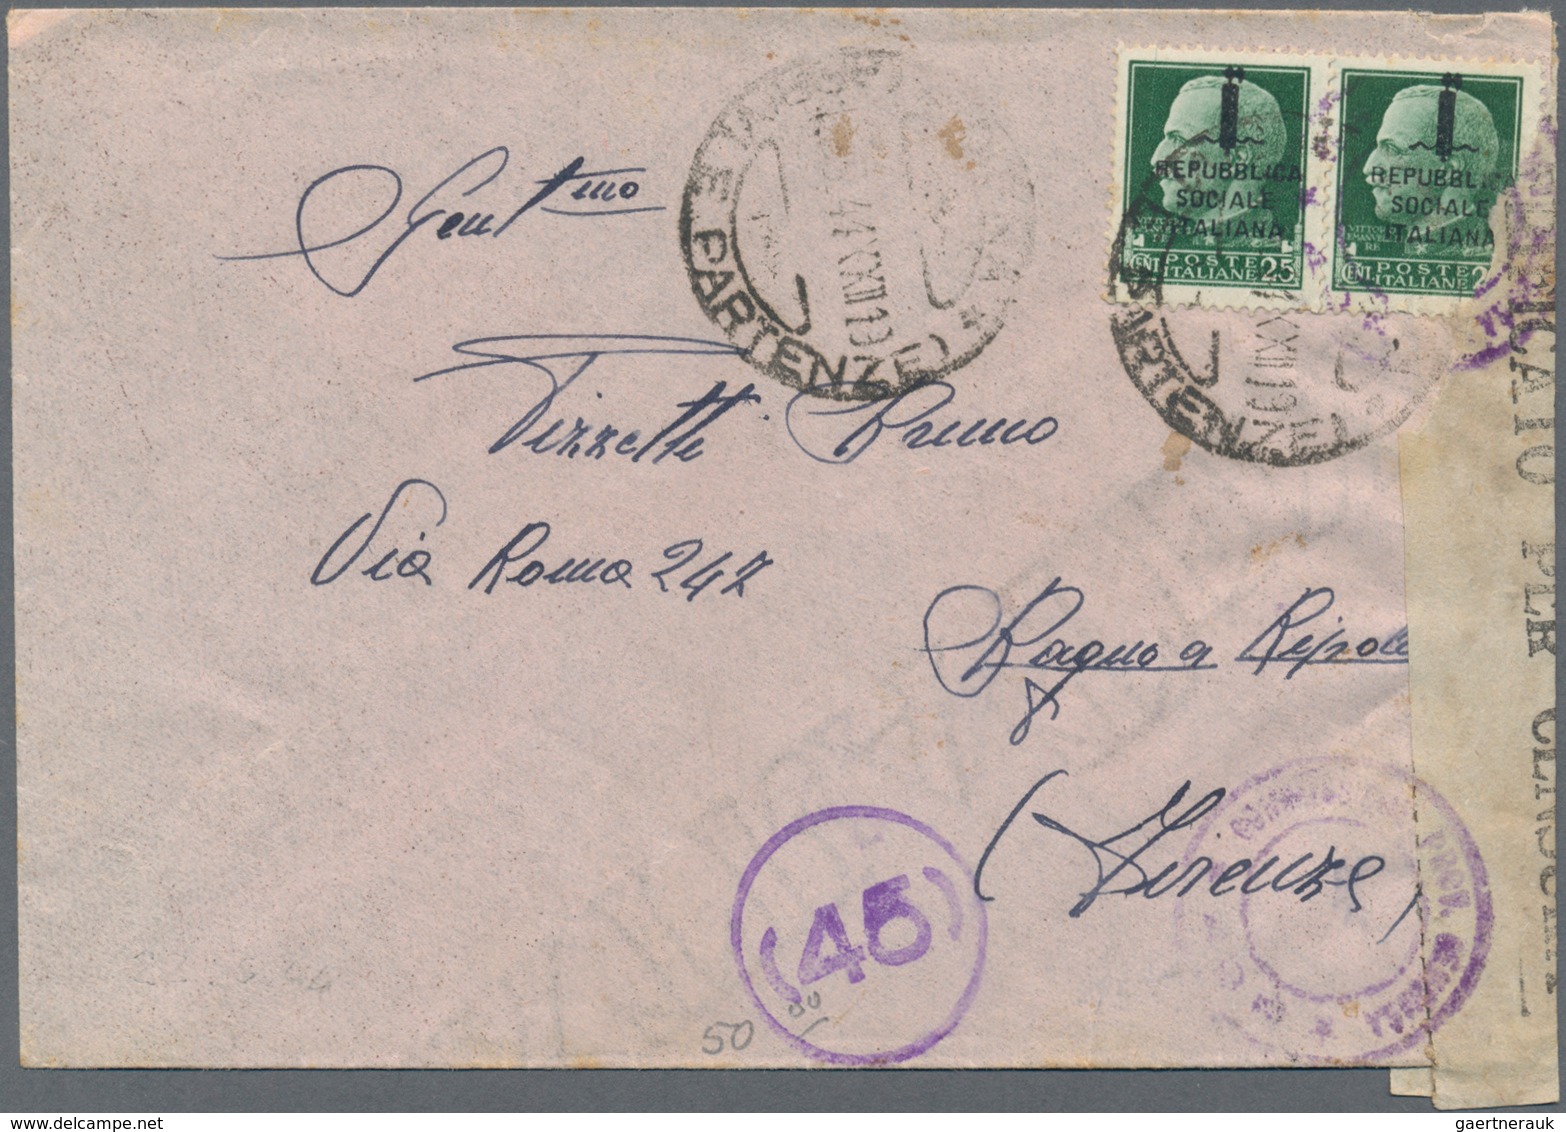 Italien: 1815/1970 (ca.), Italy/area, holding of several hundred covers/cards incl. registered and a